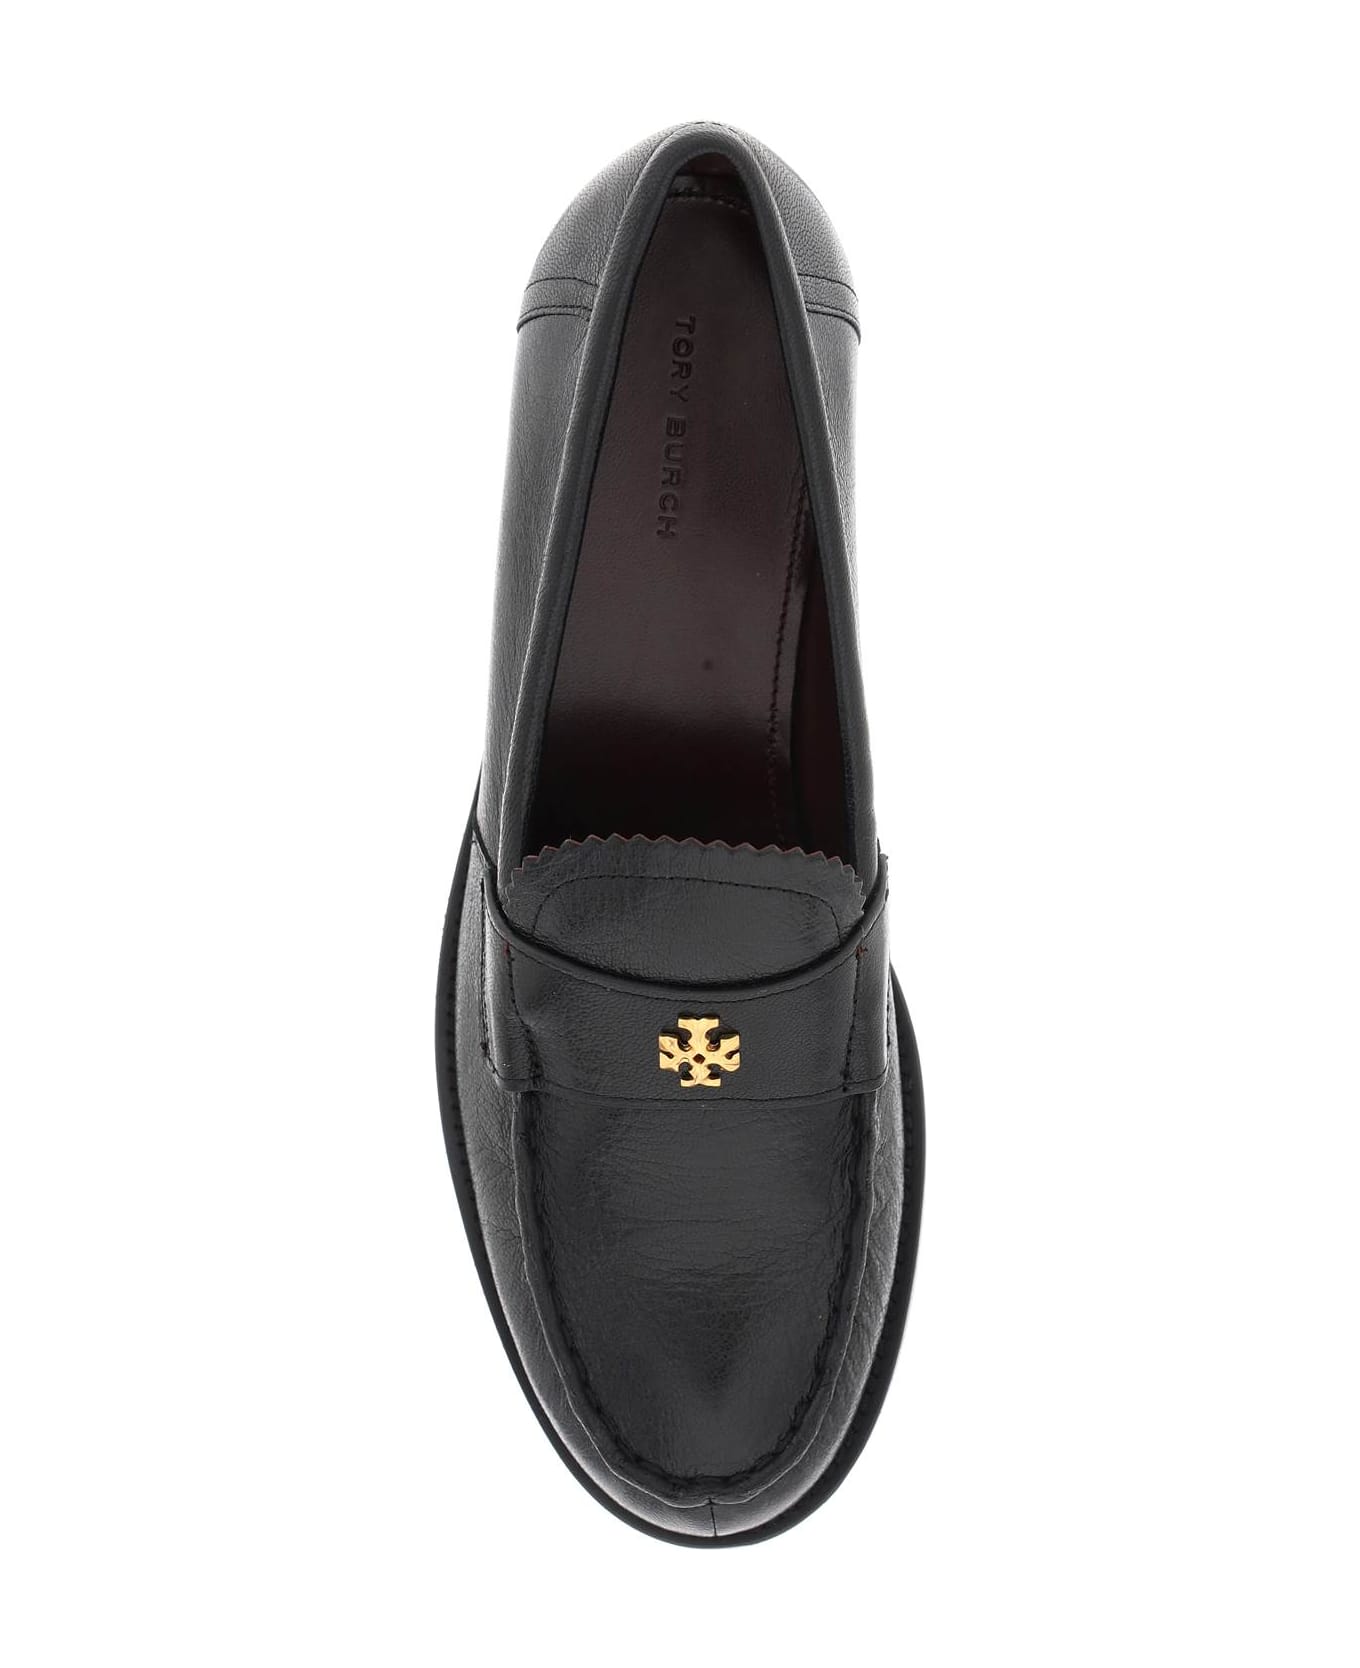 Tory Burch Perry Loafers - Black